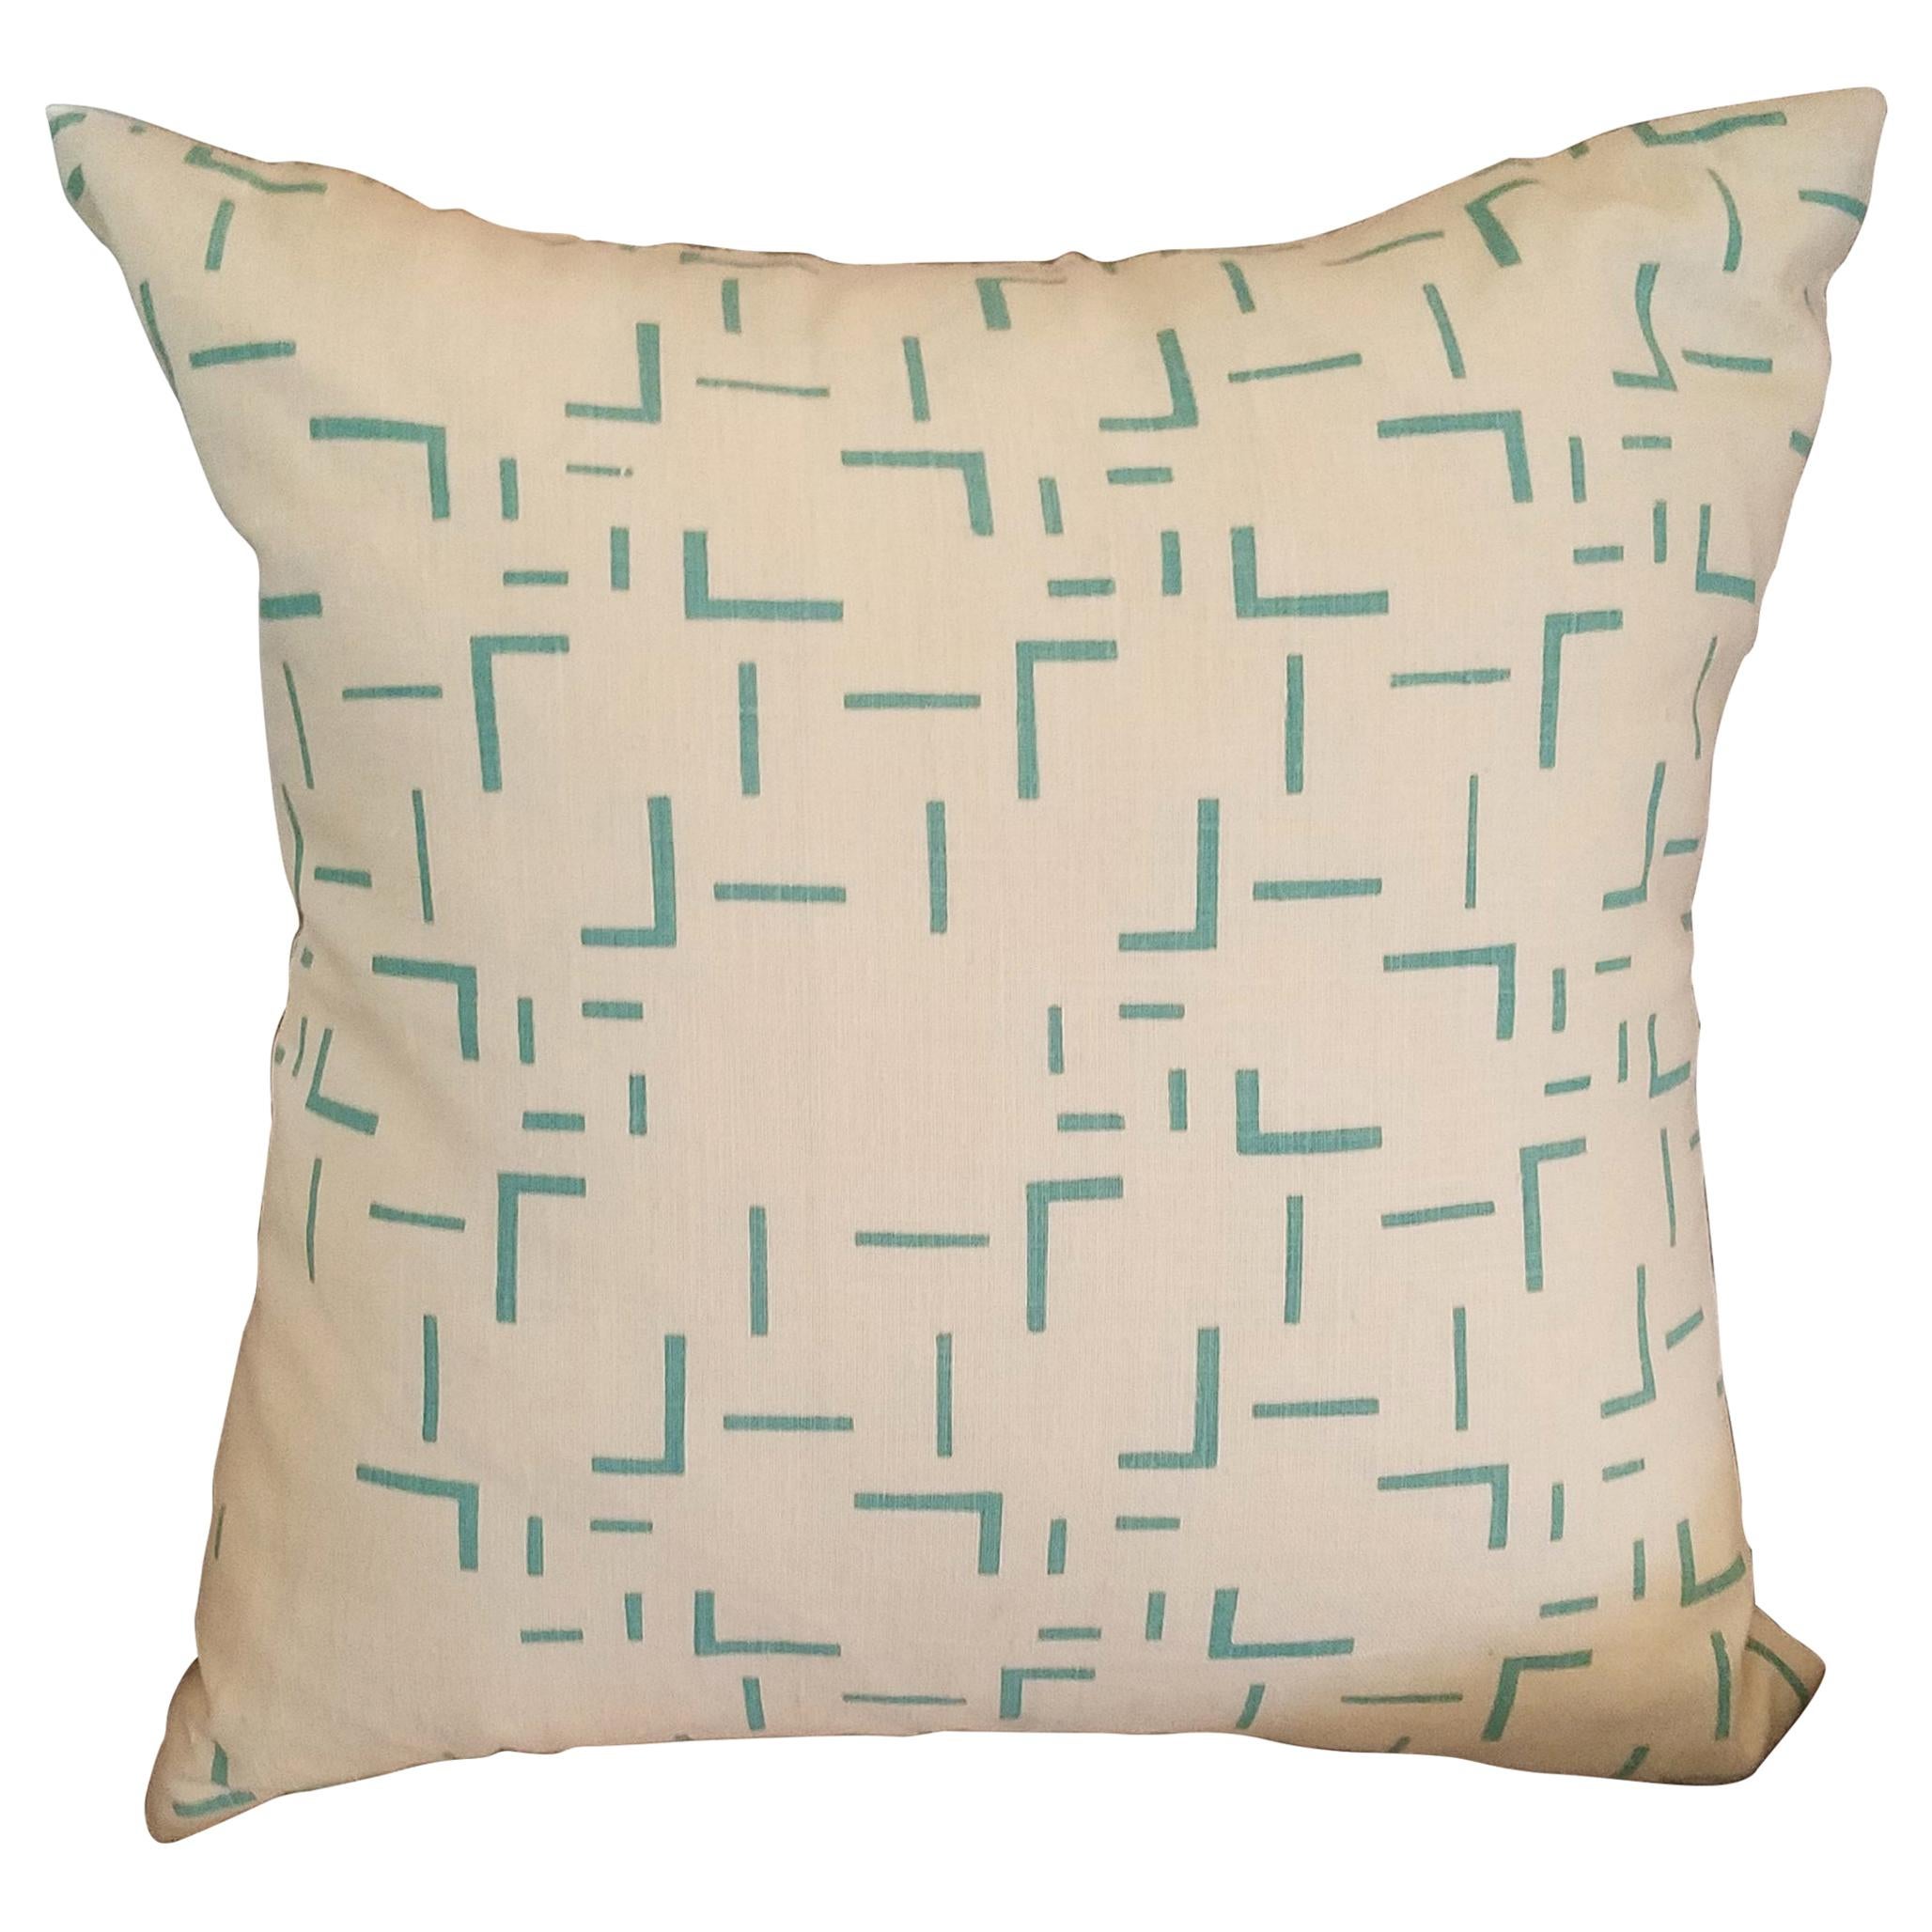 Abstract Geometric Printed Pillow For Sale